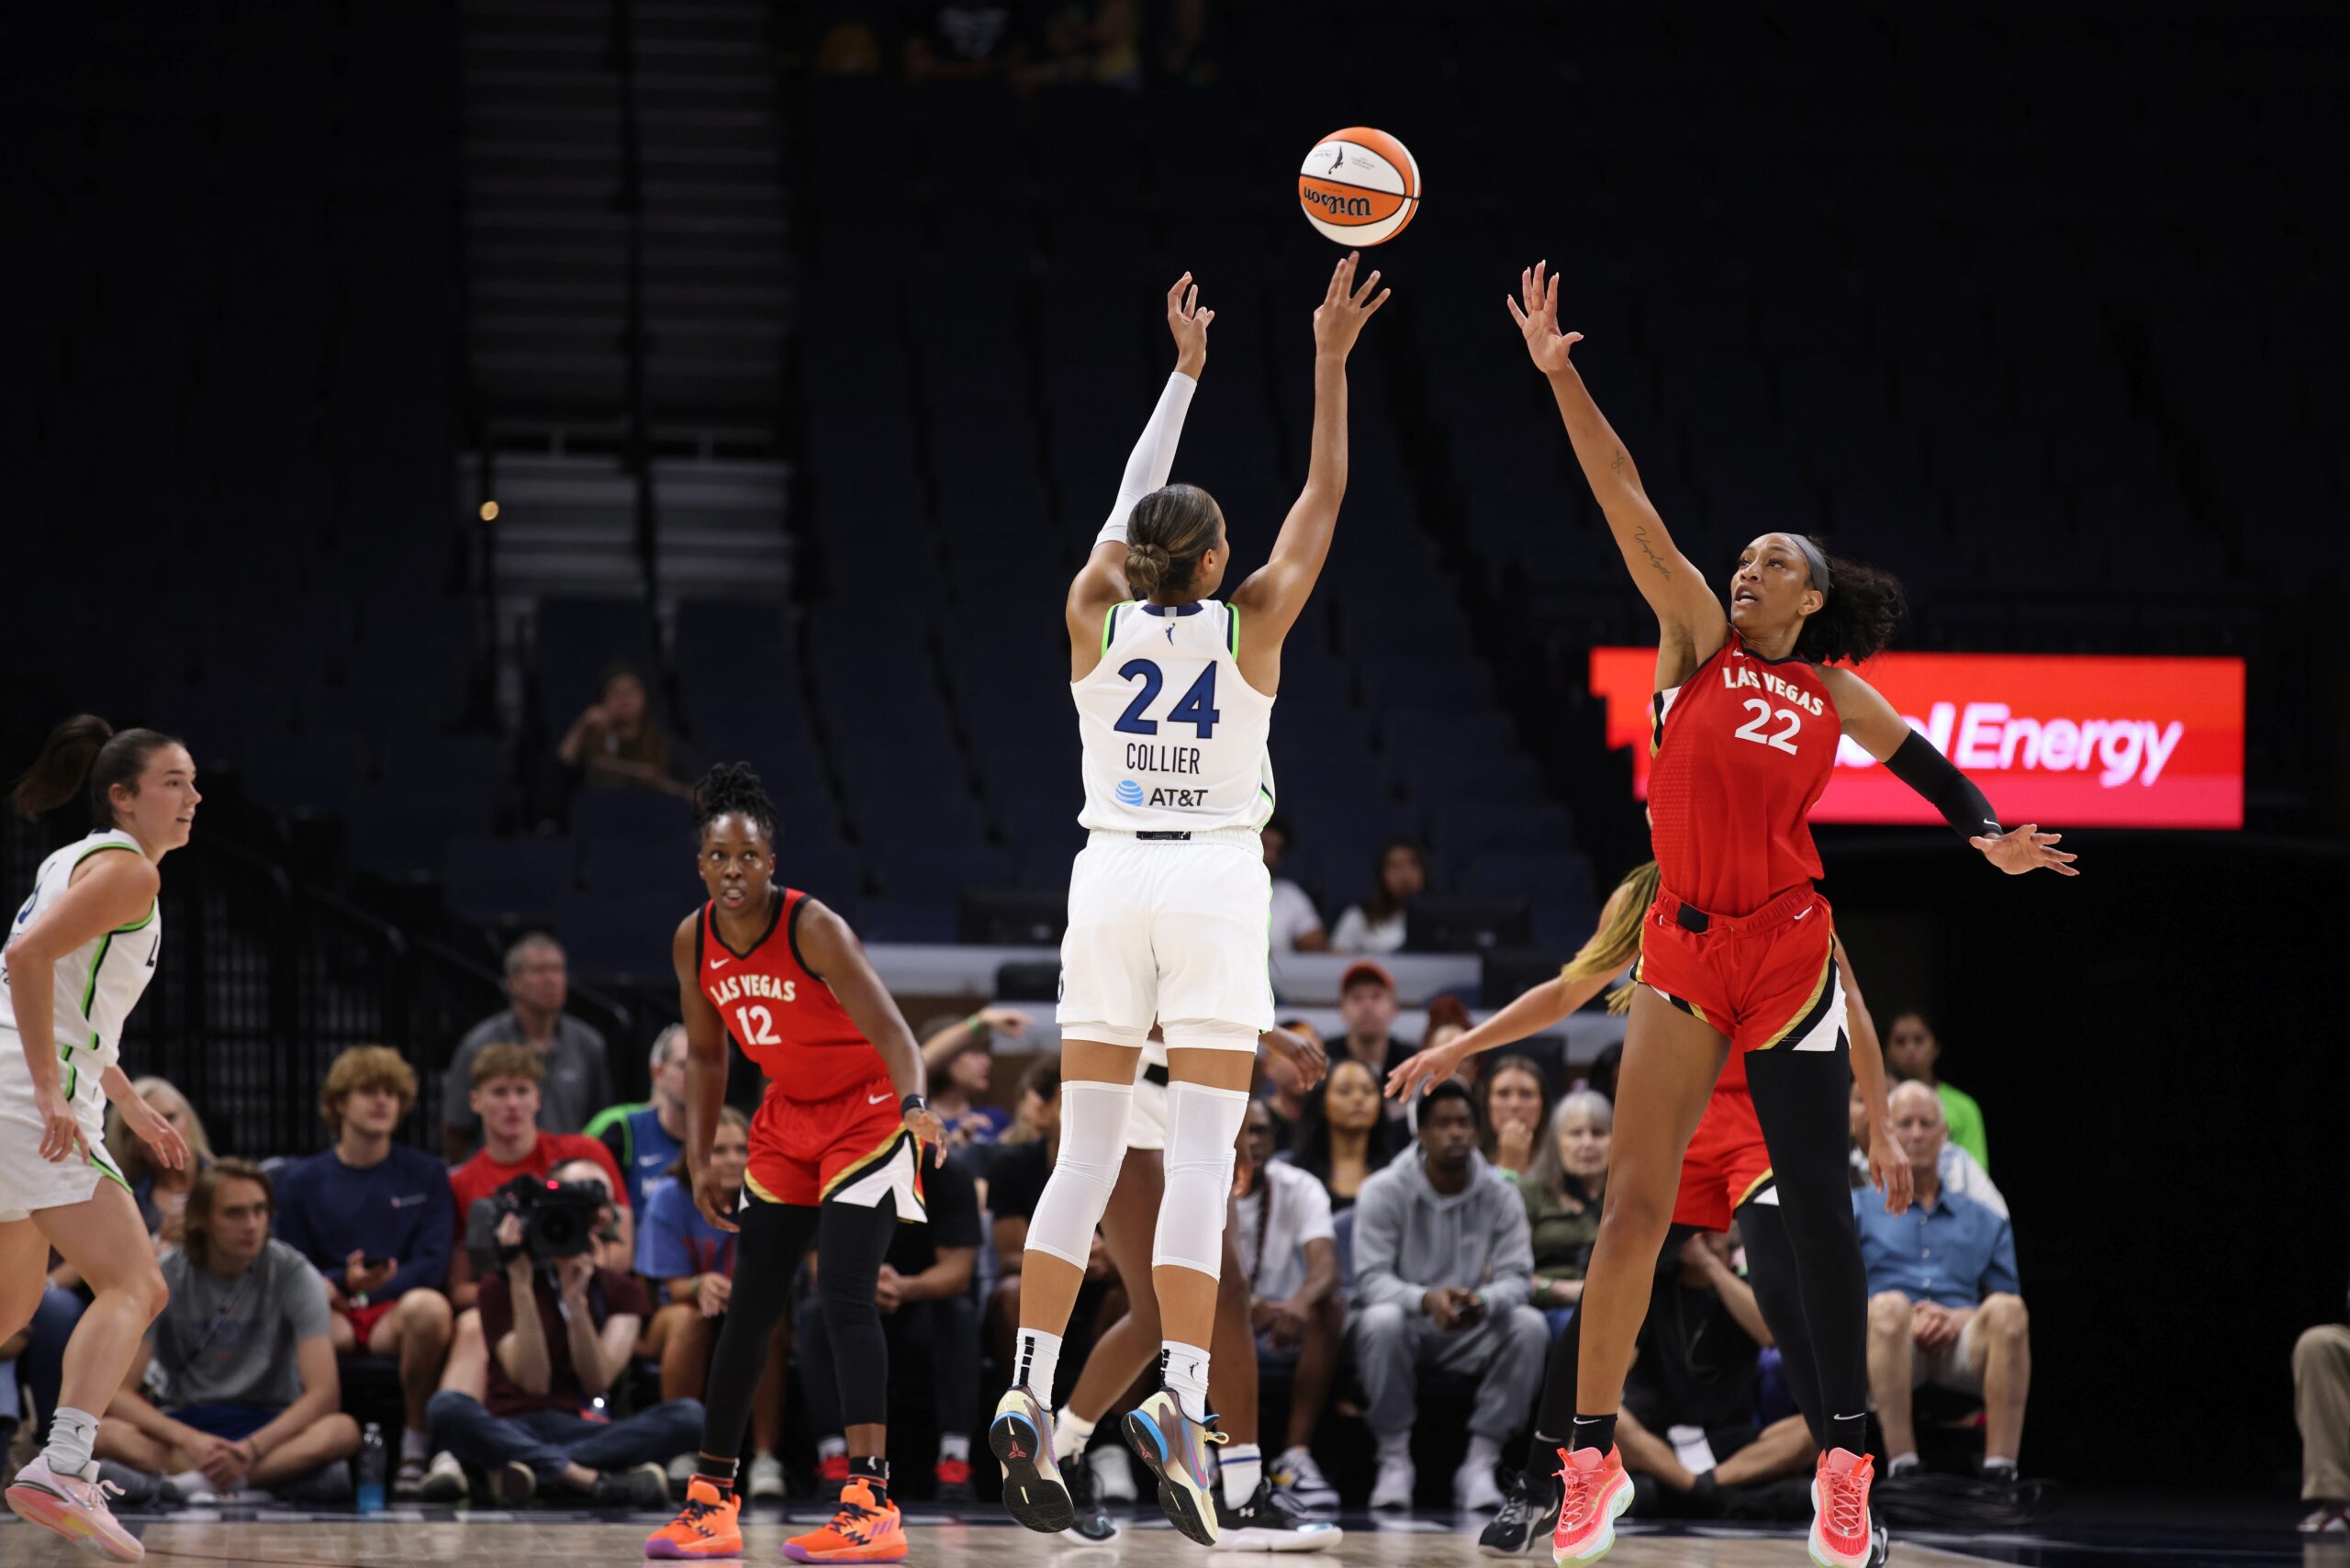 To even get consideration from free agent-to-be Jewell Loyd, Sky